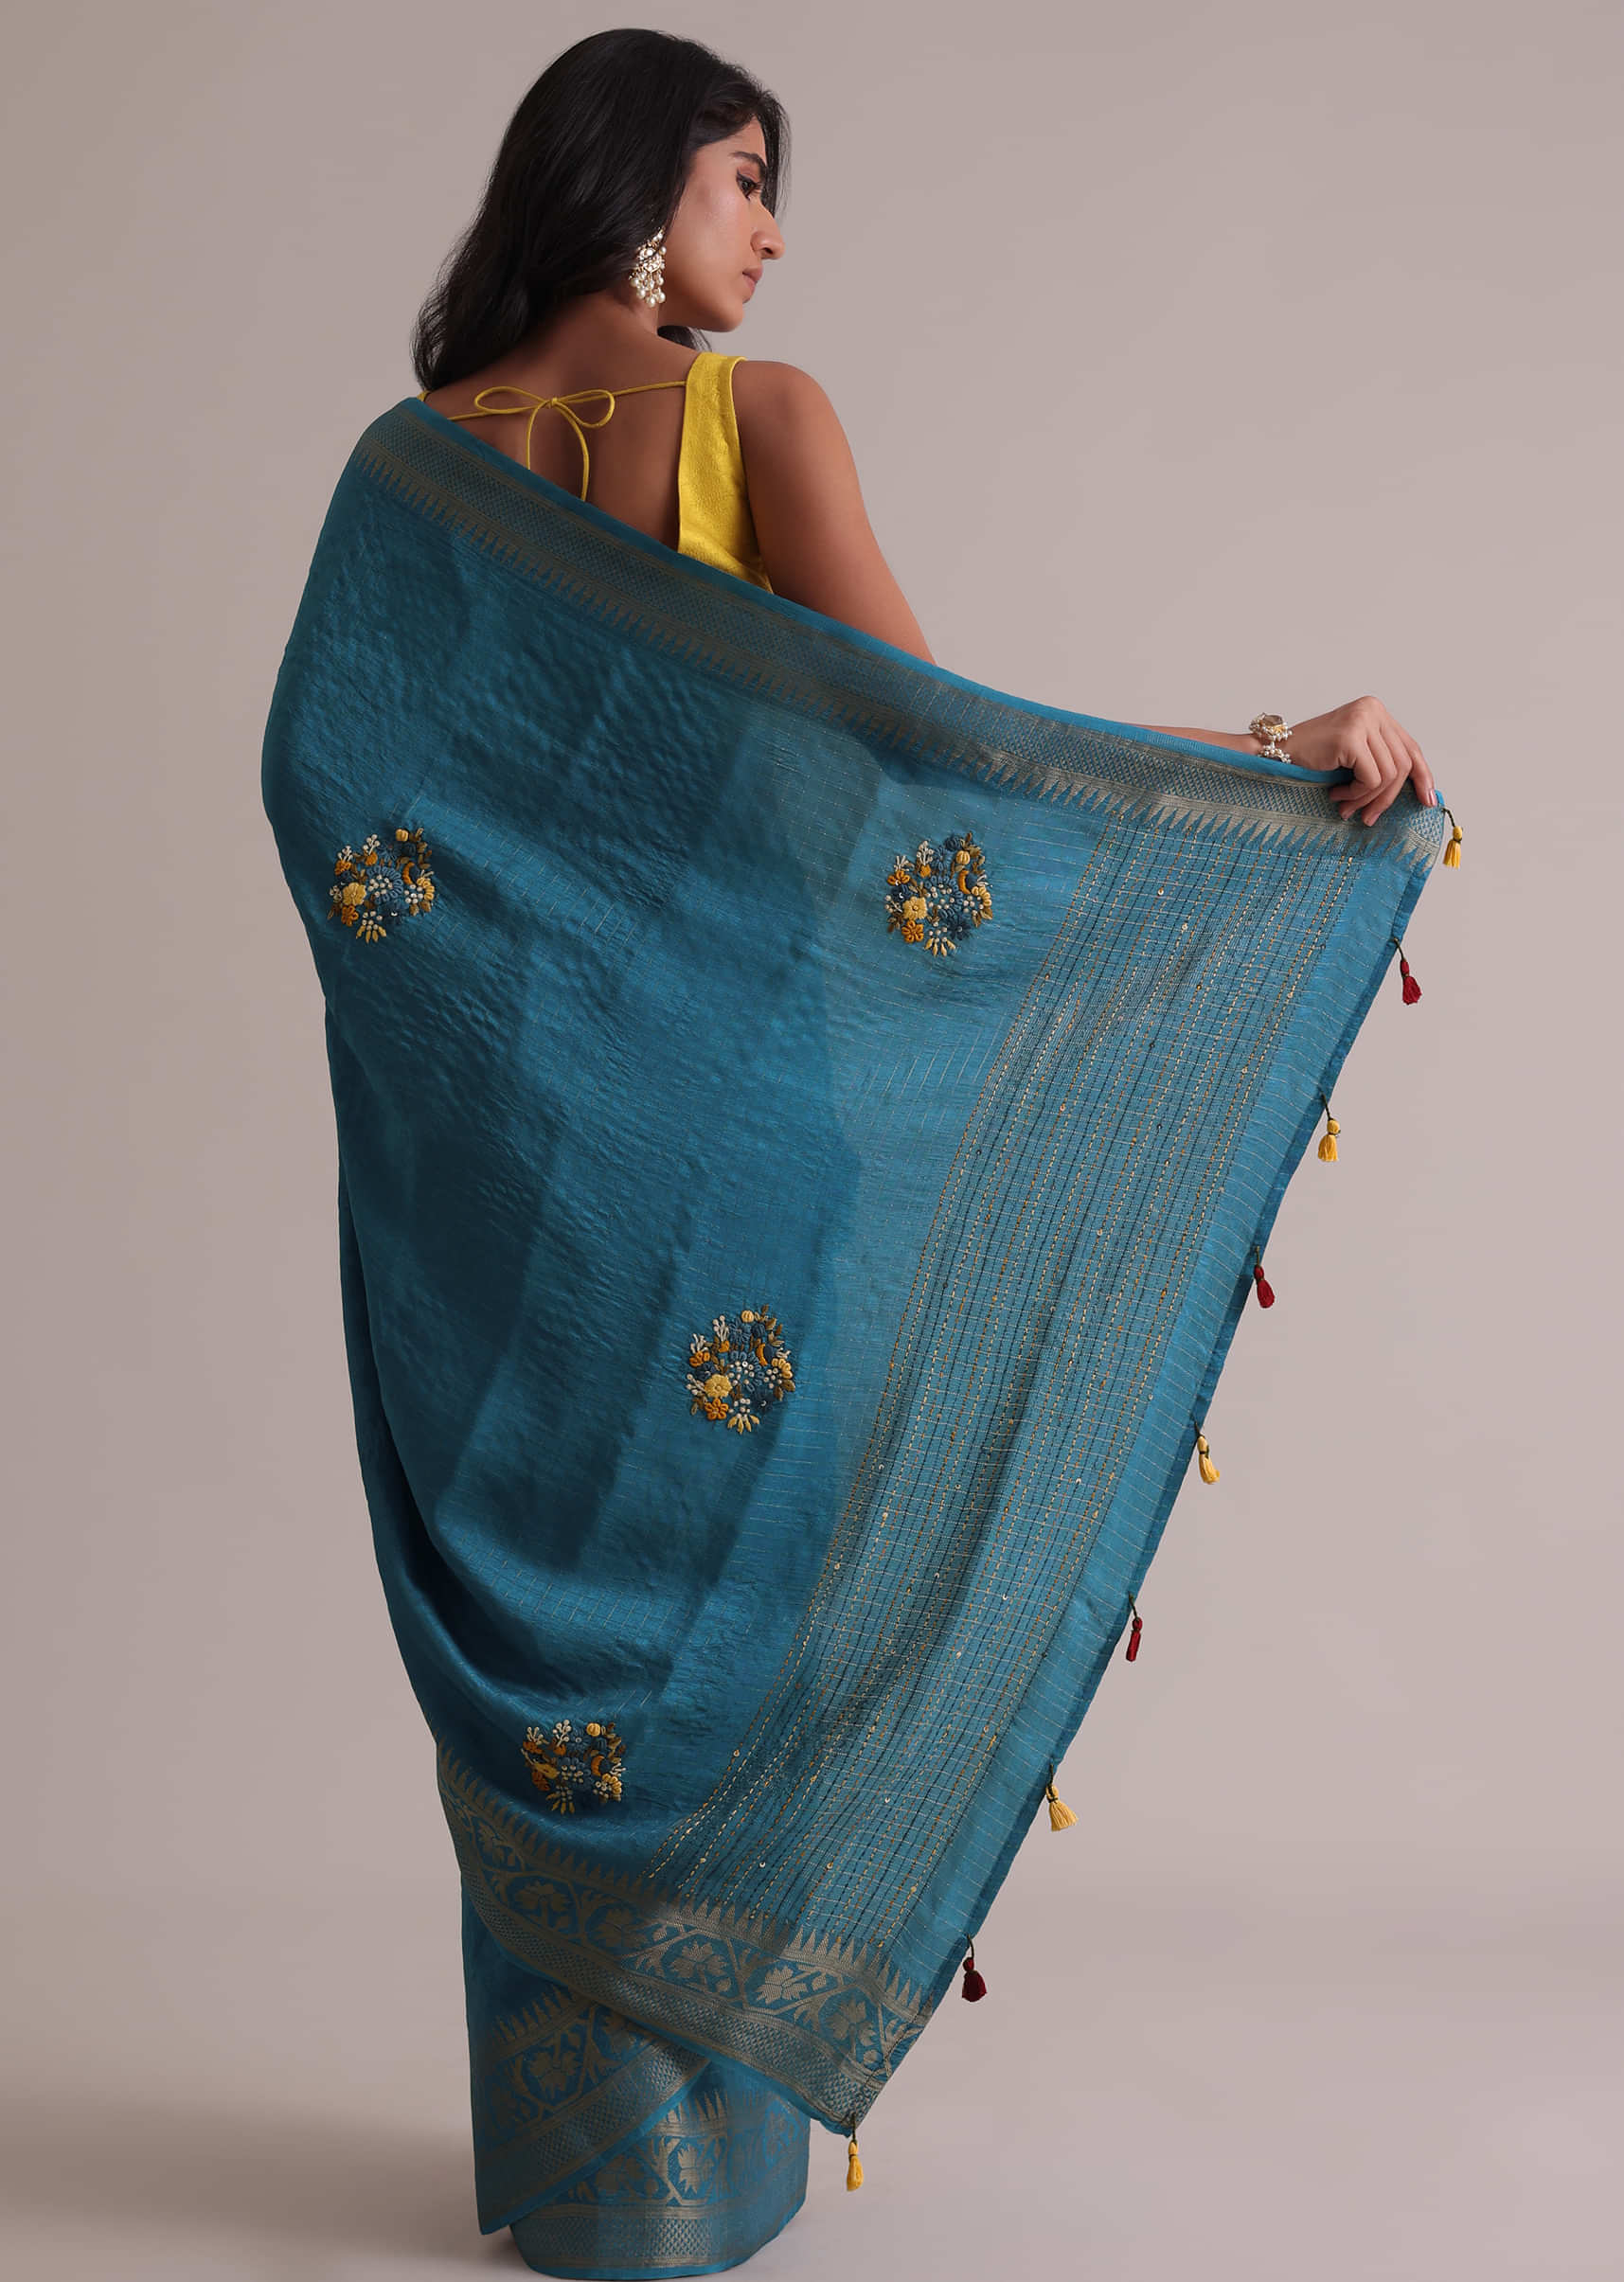 Blue Saree In Georgette Tussar With Brocade, Zari, And Resham 3D Bud Embroidery